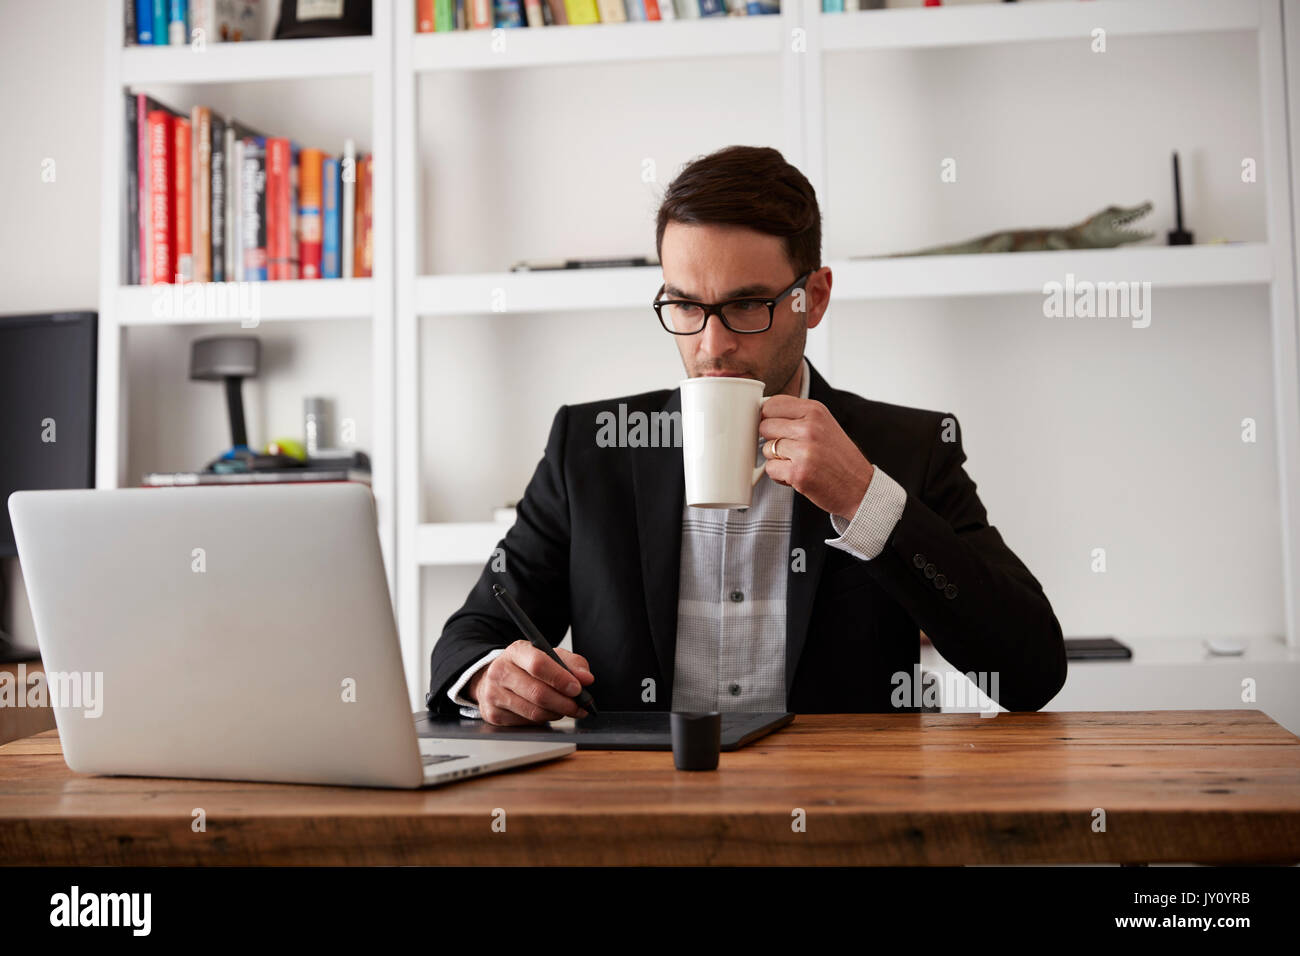 Caucasian businessman using laptop and digital tablet drinking coffee Stock Photo